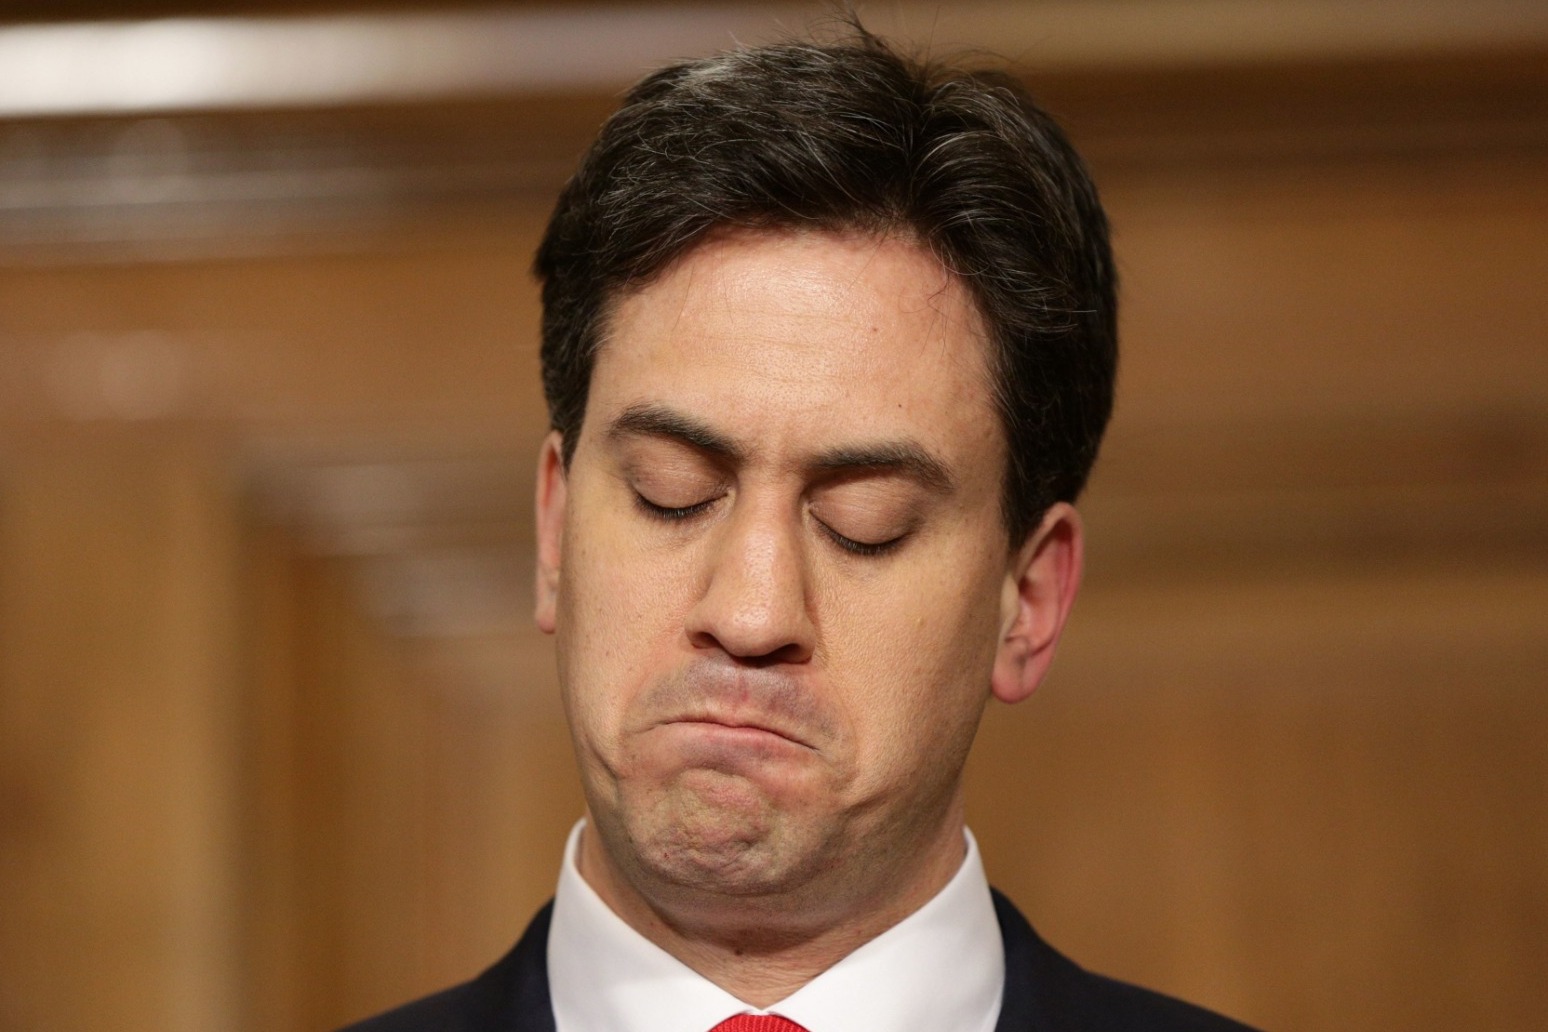 FORMER LABOUR LEADER ED MILIBAND TO SPEARHEAD INQUEST INTO ELECTION DEFEAT 